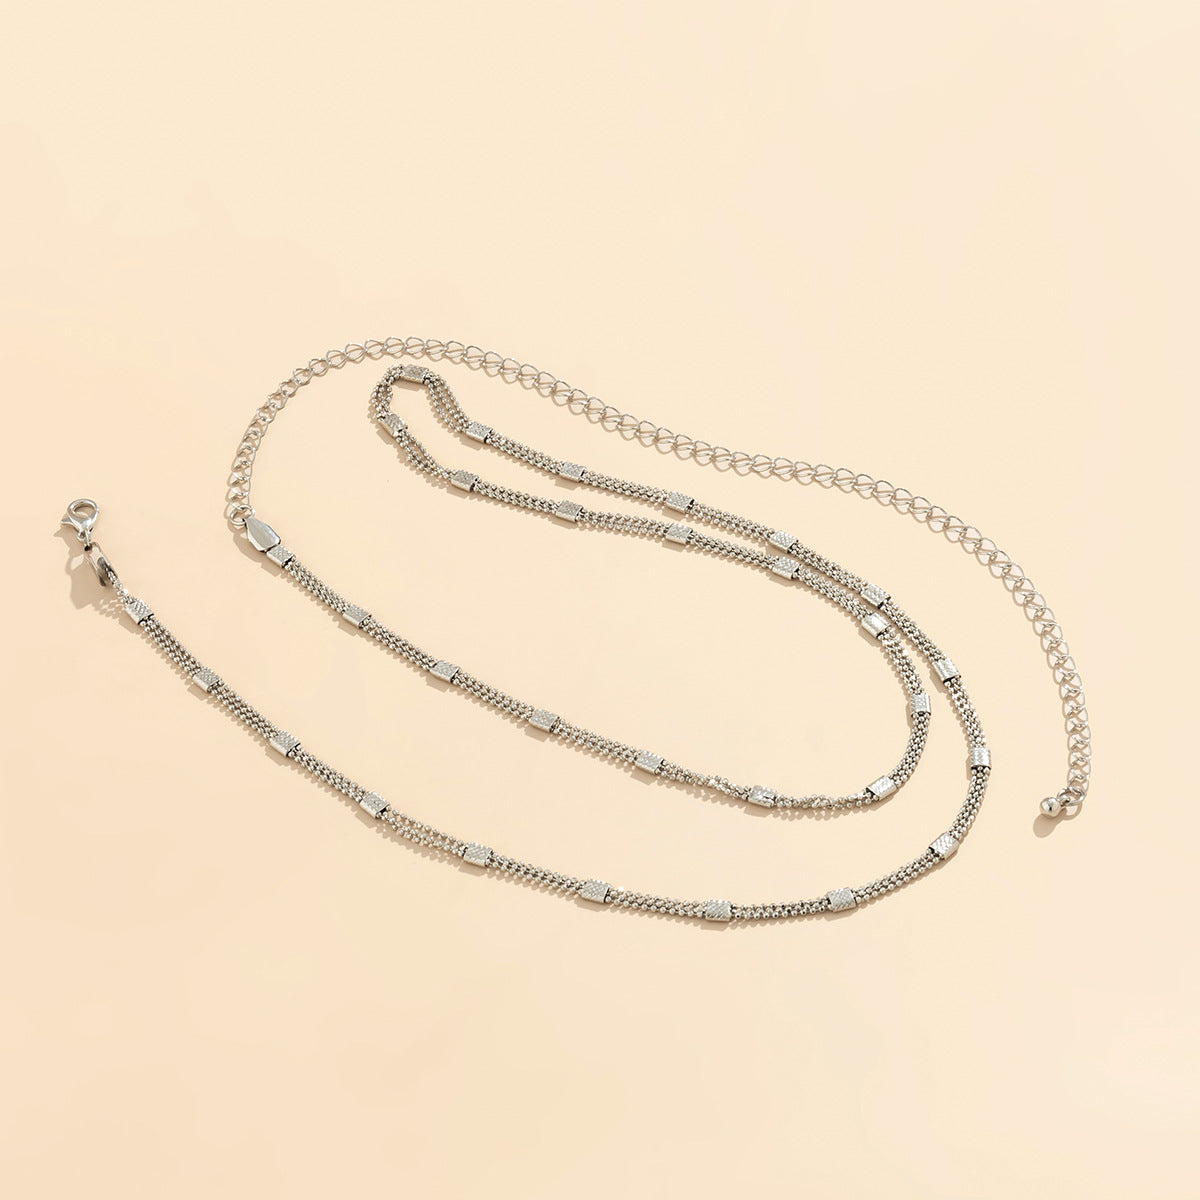 Stylish Multi-layer Body Chain for Women with Vintage Oversized Design